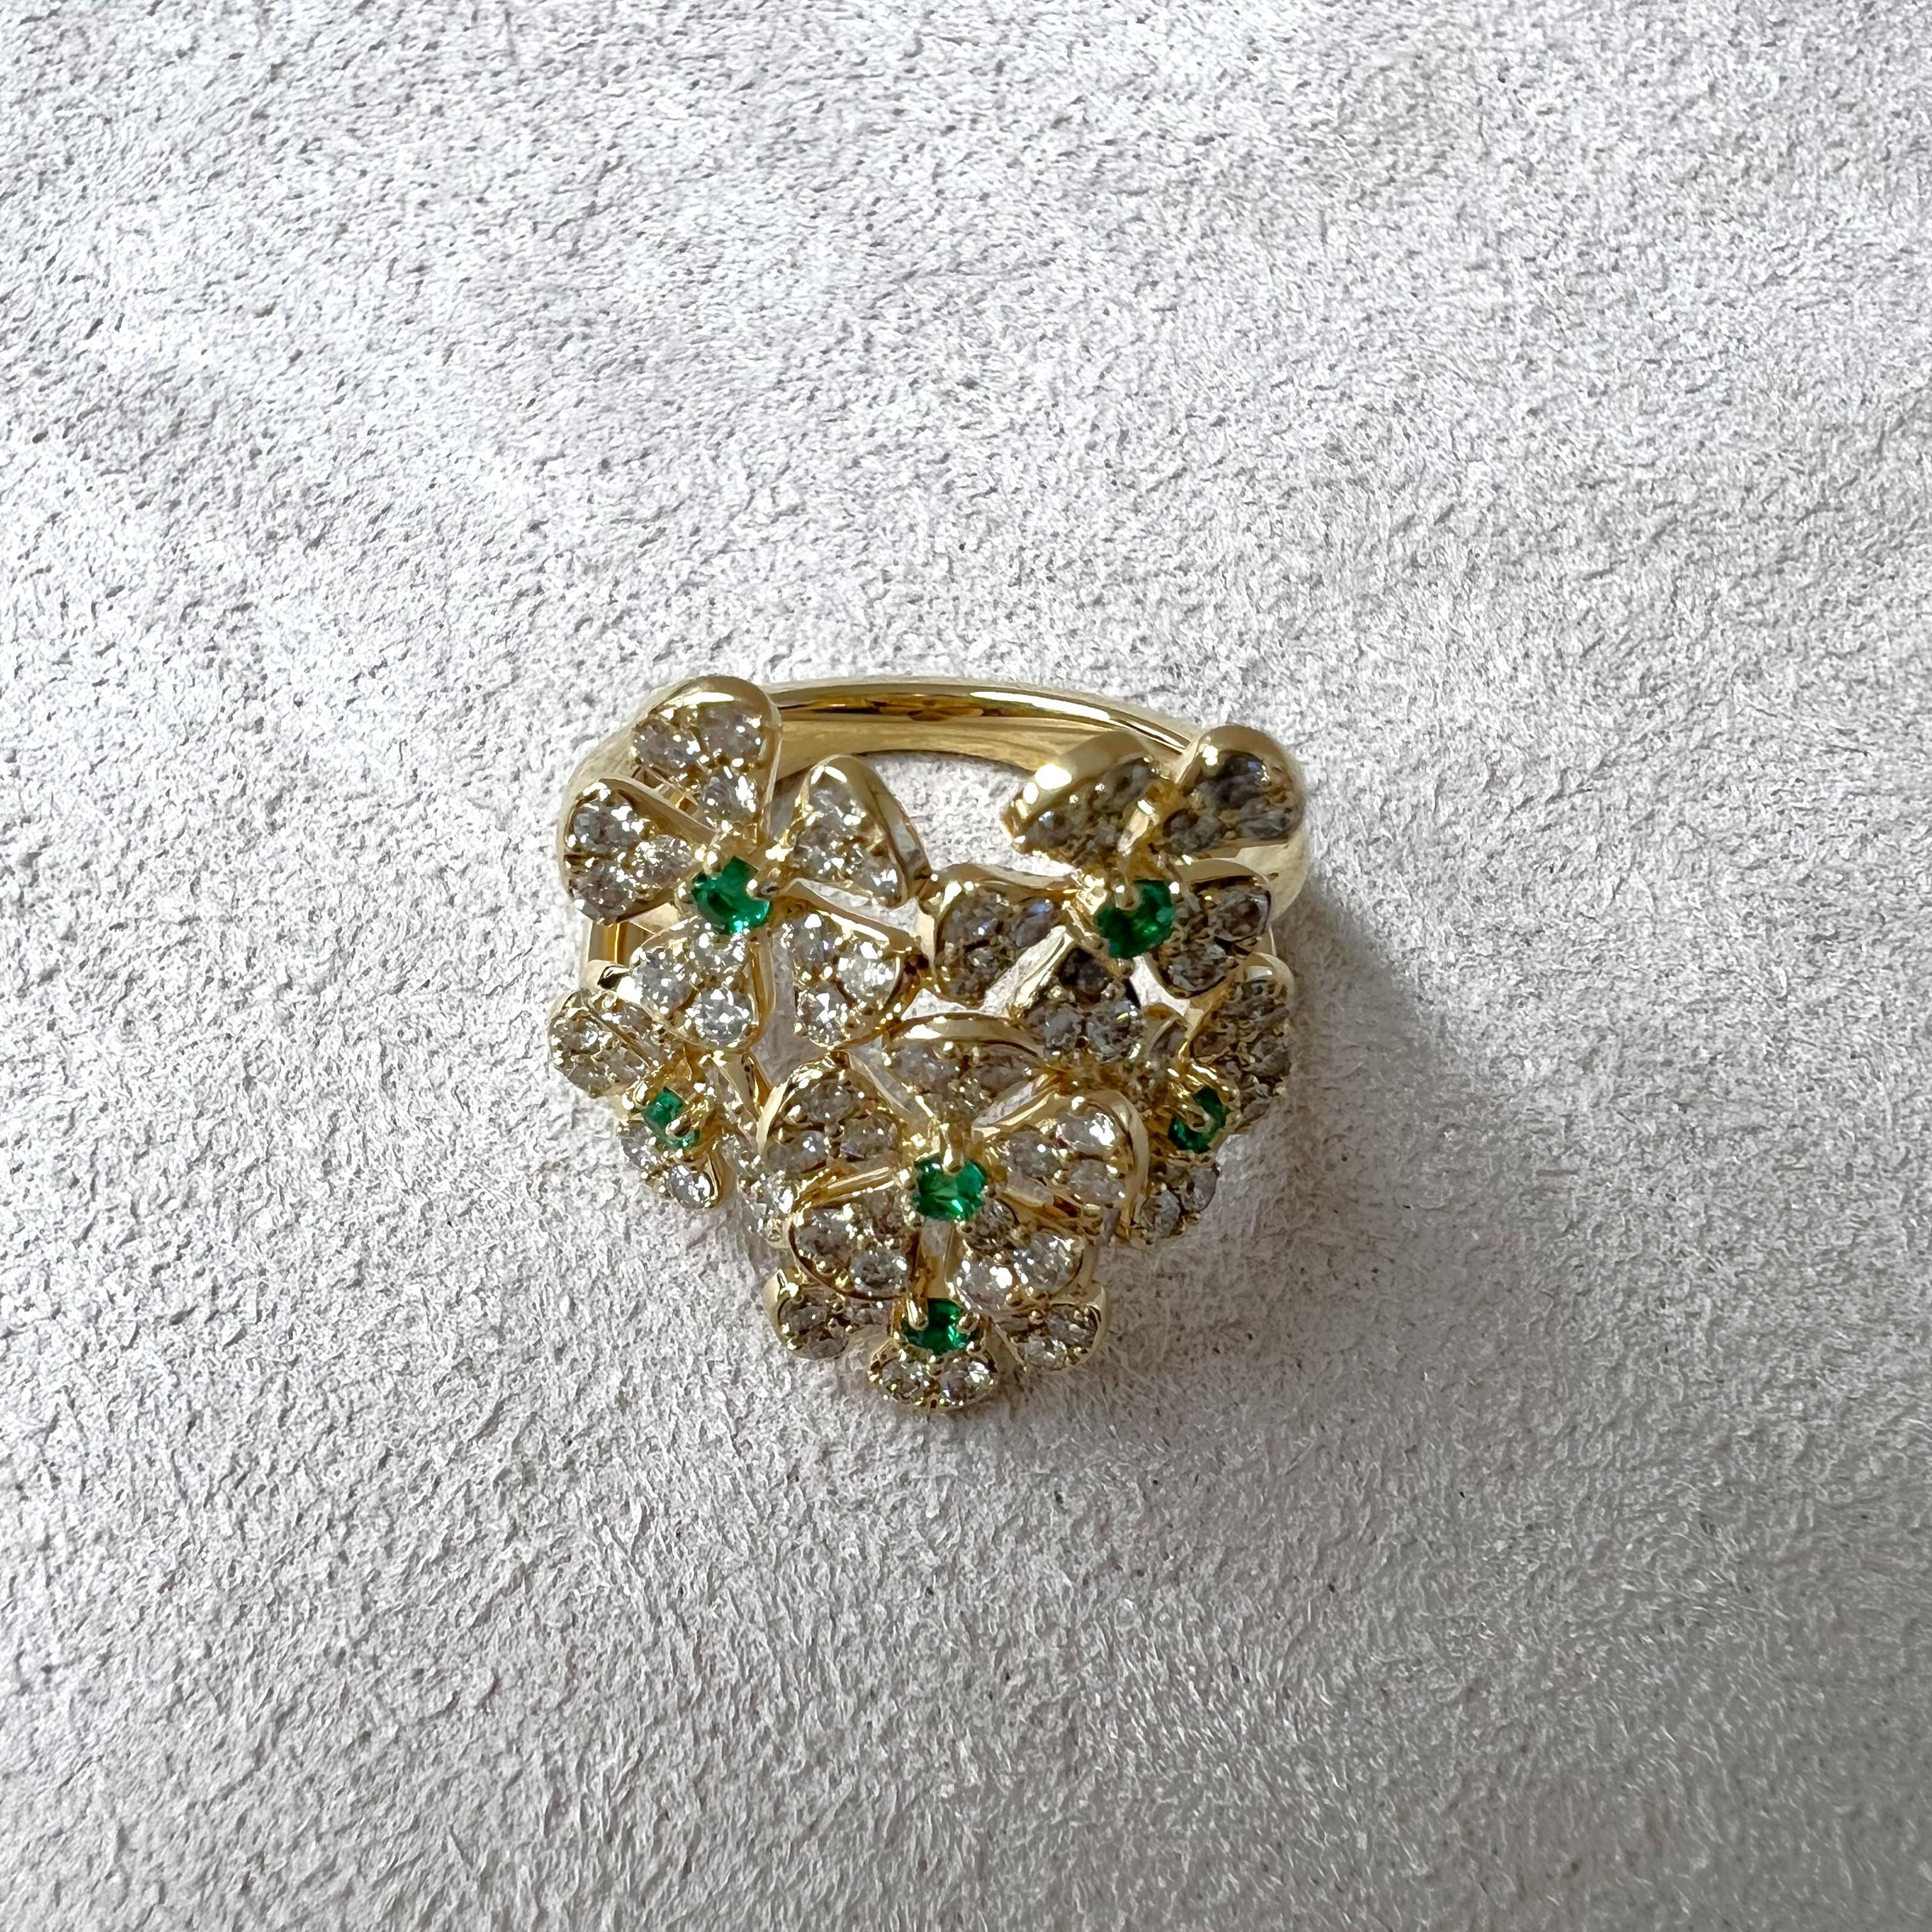 Created in 18 karat yellow gold
Emeralds 0.15 carat approx.
Diamonds 1.35 carats approx.
Ring size US 7, can be made in other ring sizes on special order
Limited edition

Exquisitely crafted in 18 karat yellow gold, this limited edition ring